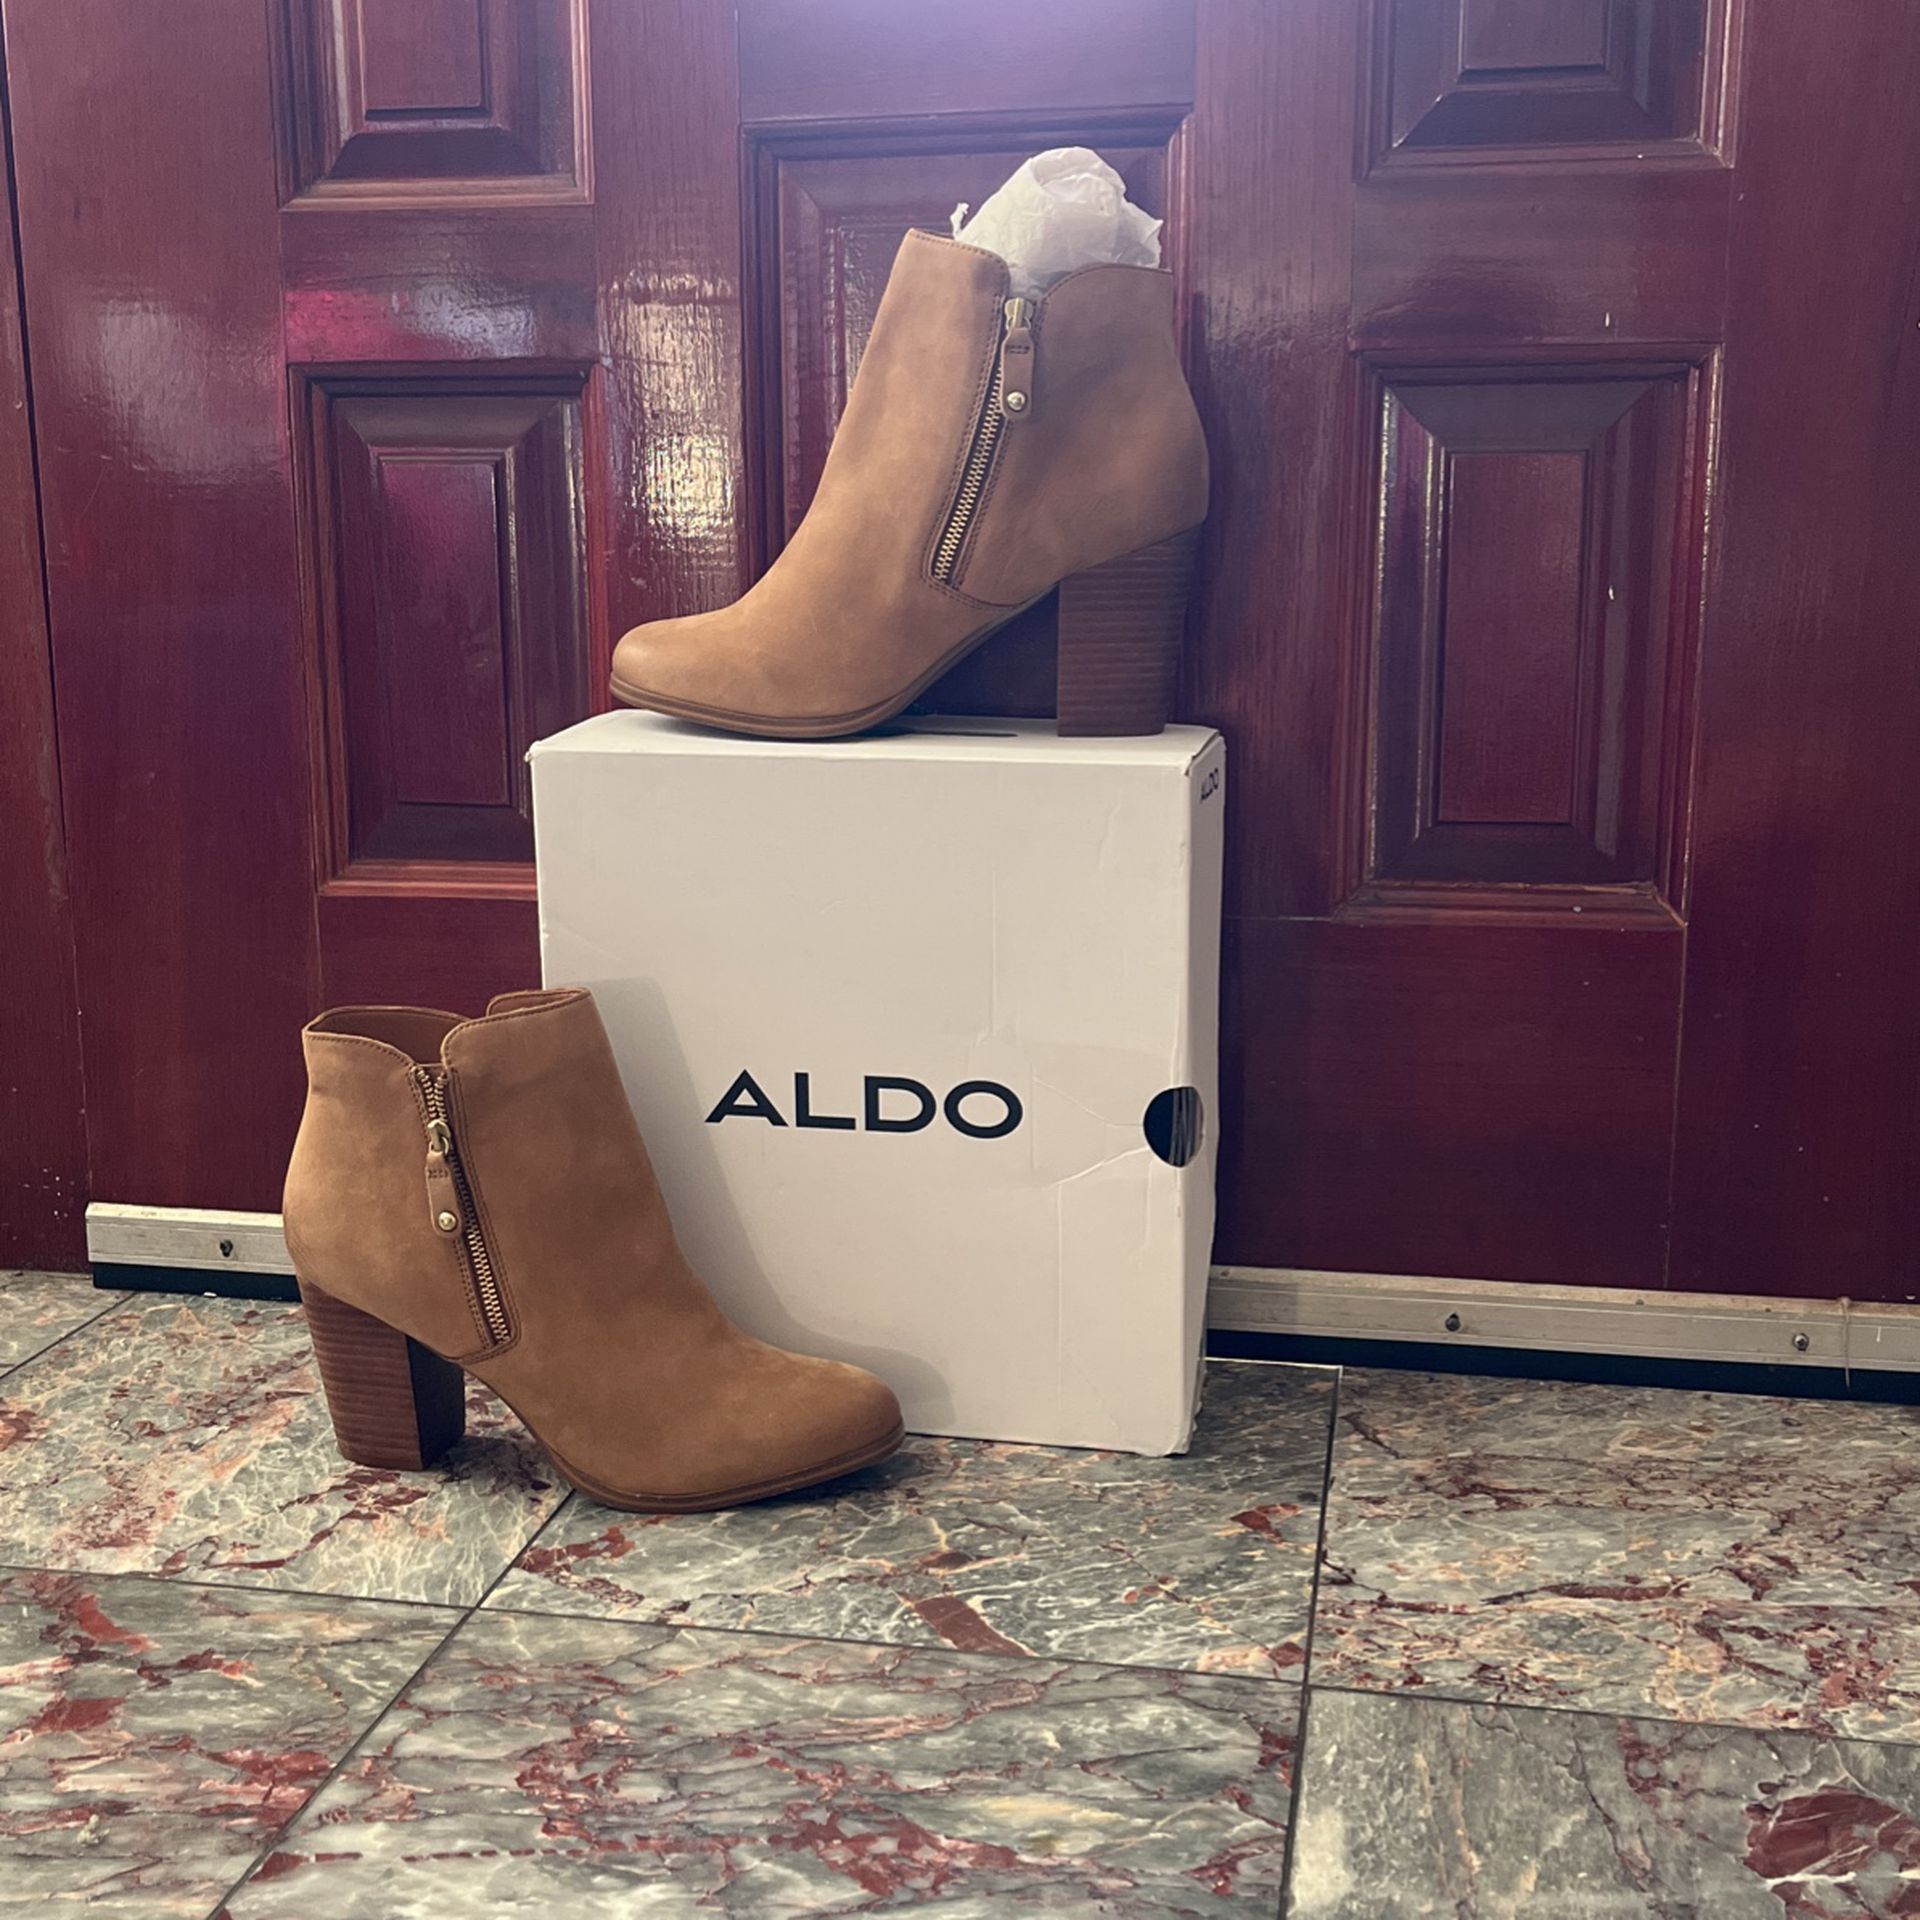 Aldo Boots  Original Price Is 125$ But I Only Want 40$ For It 